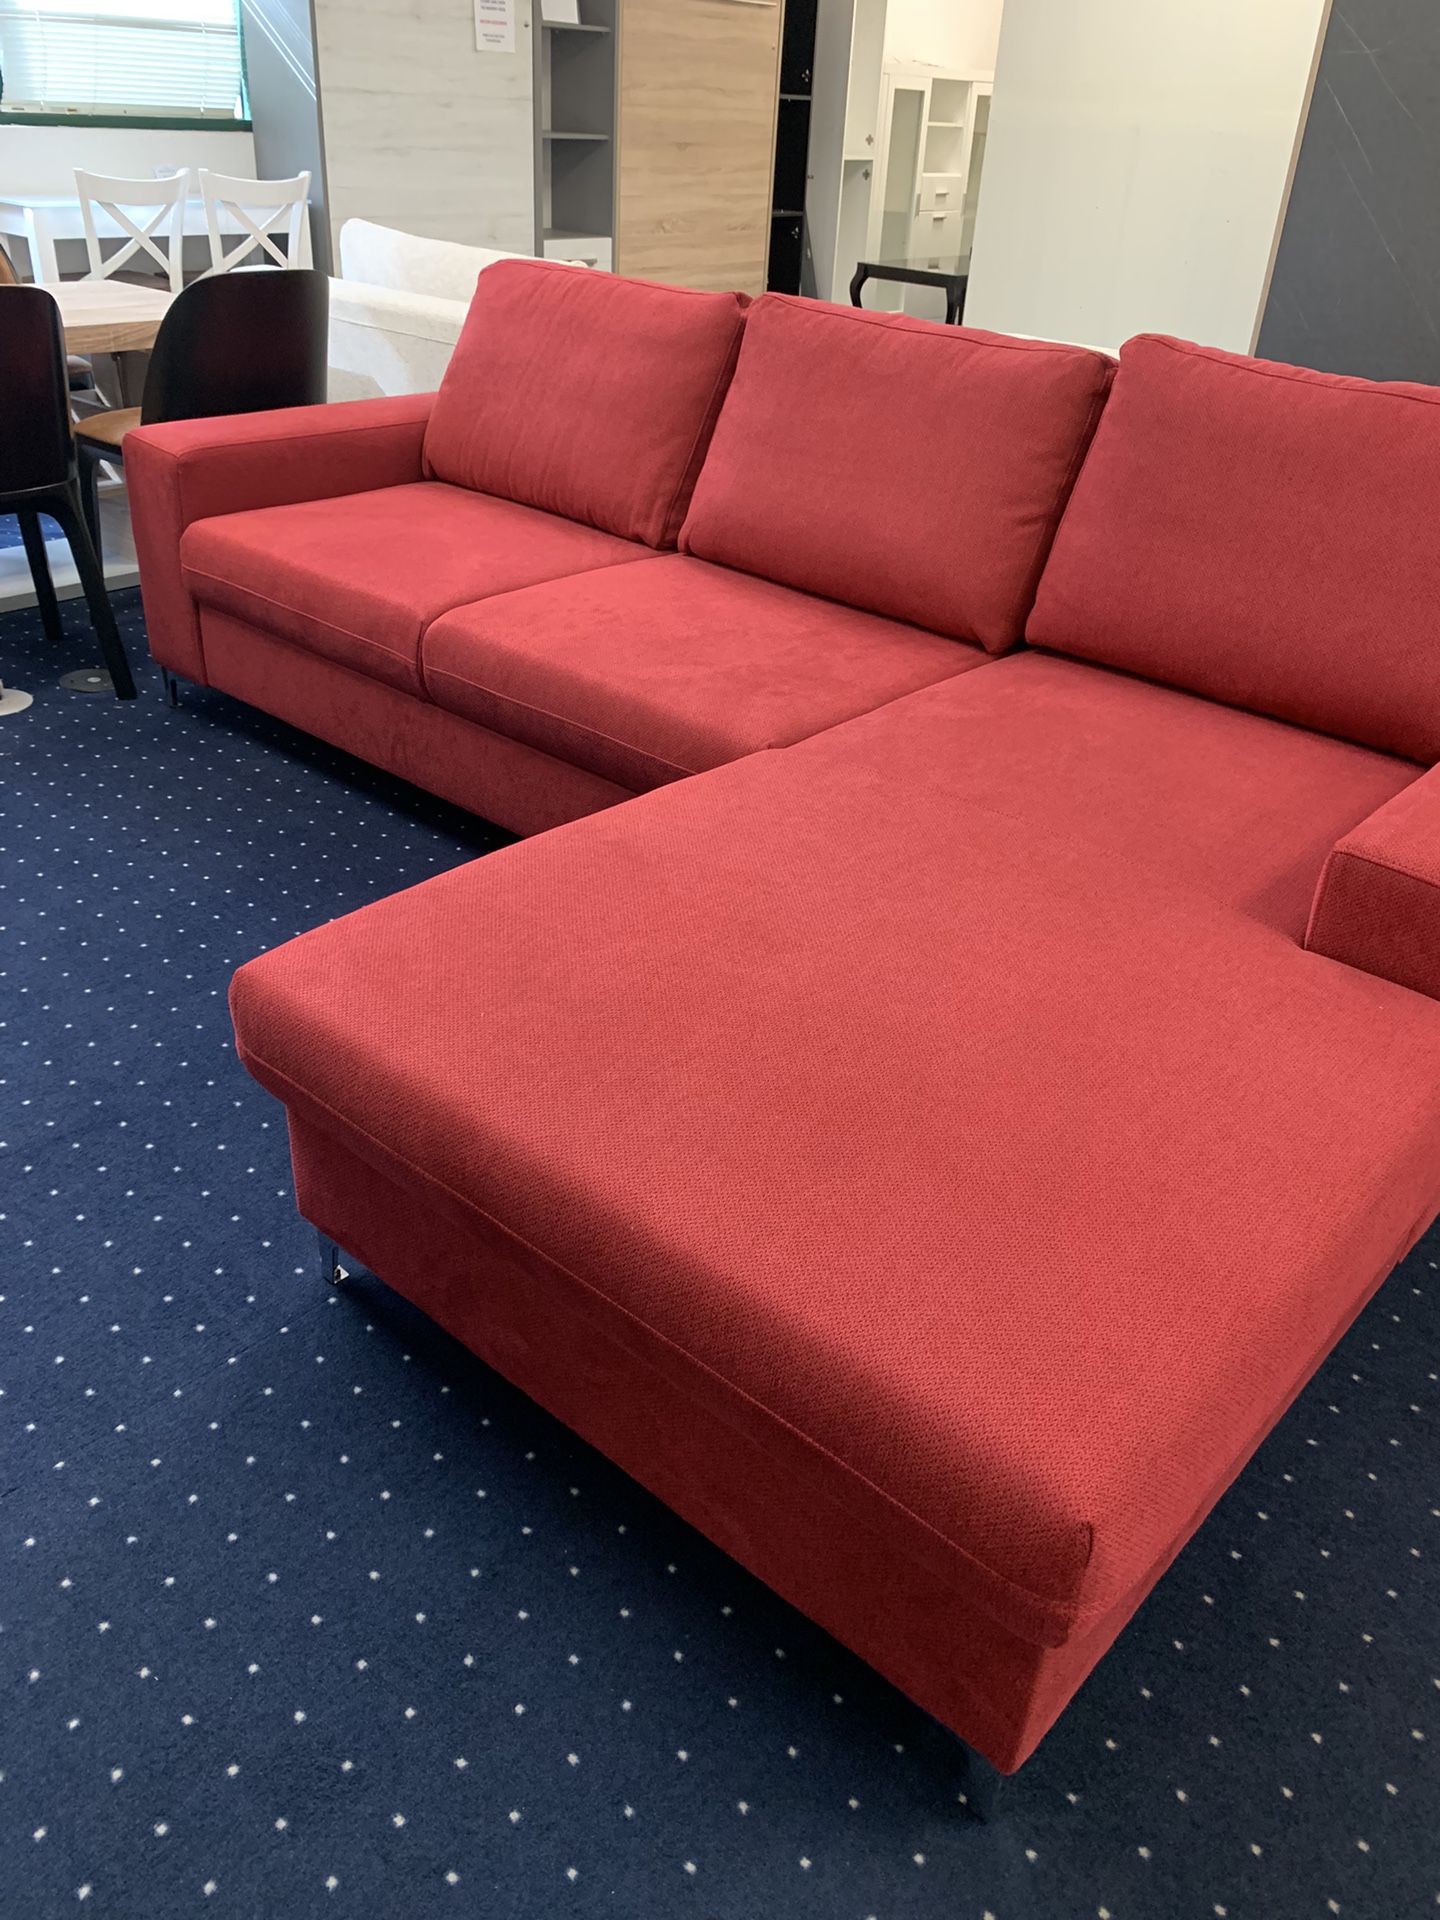 RED SECTIONAL SLEEPER SOFA ON SALE $750